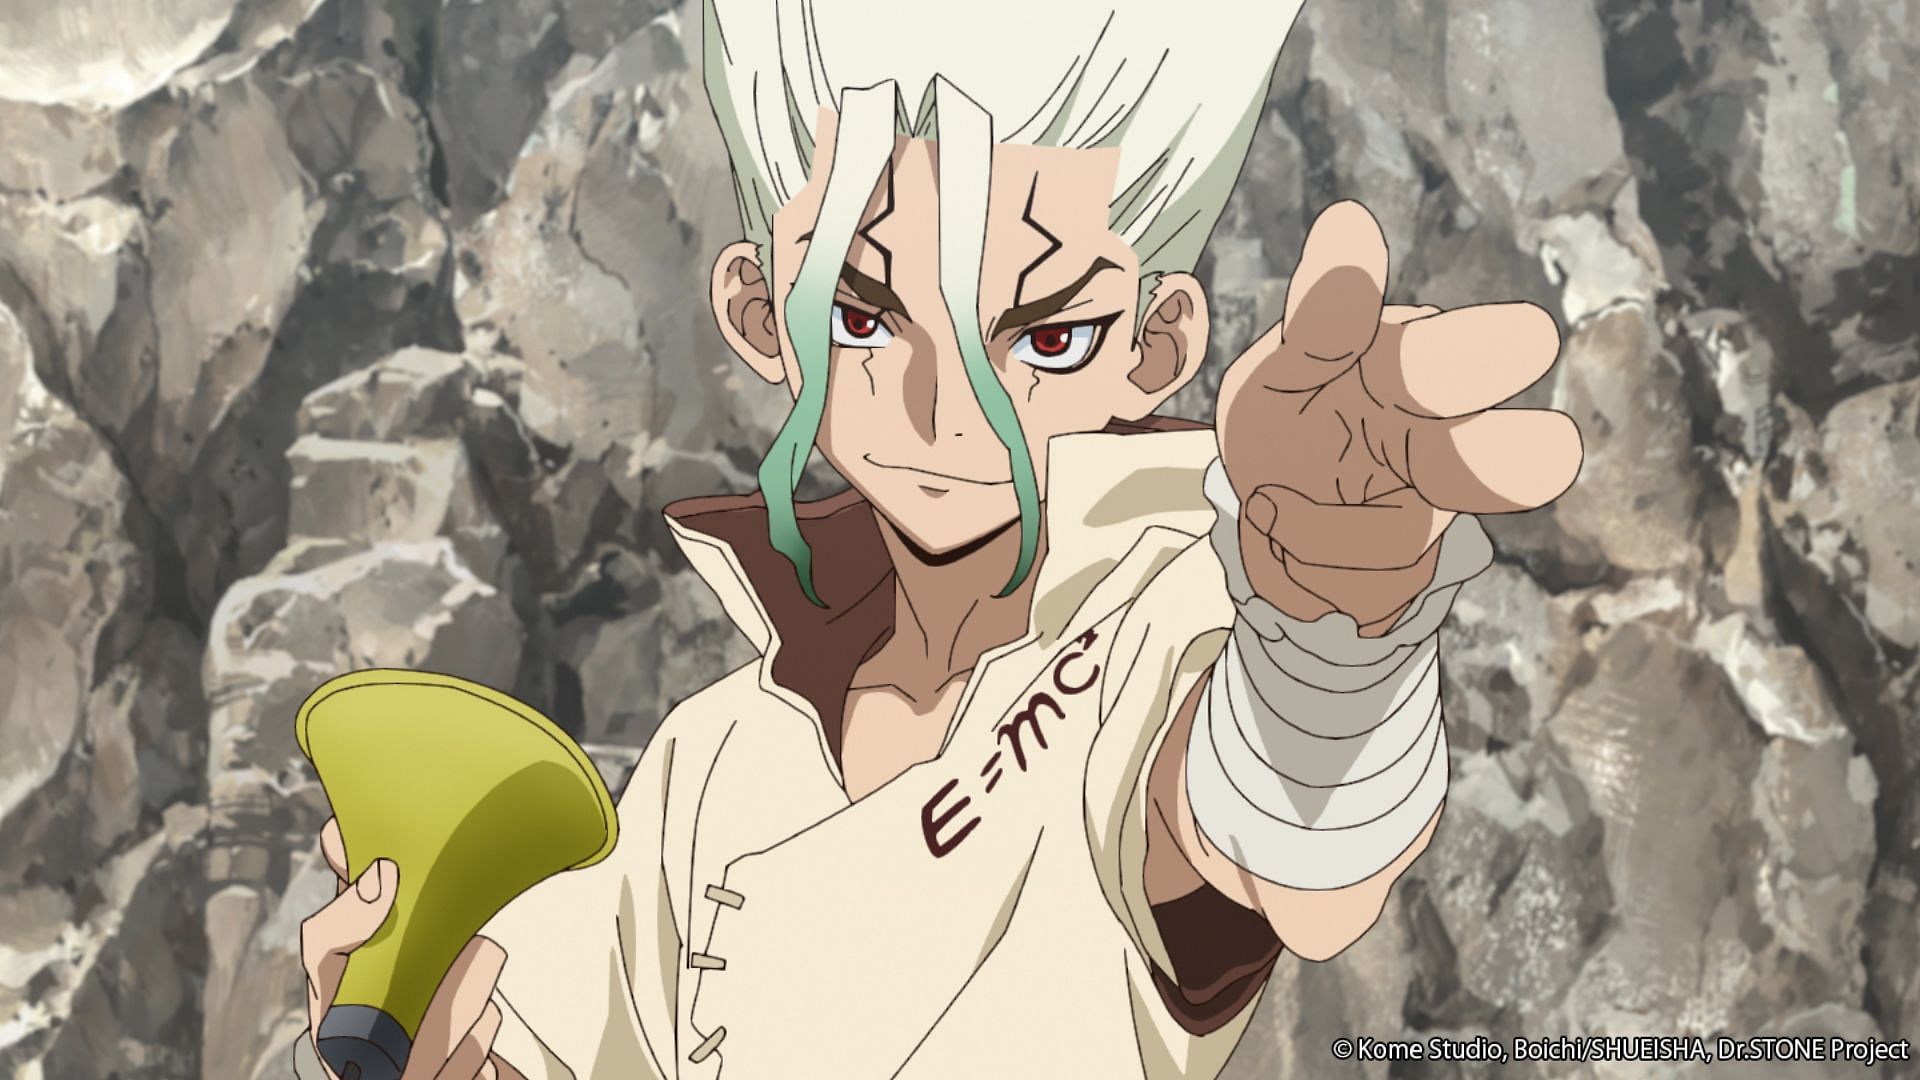 Dr. Stone season 4 seemingly confirmed in latest Weekly Shonen Jump issue